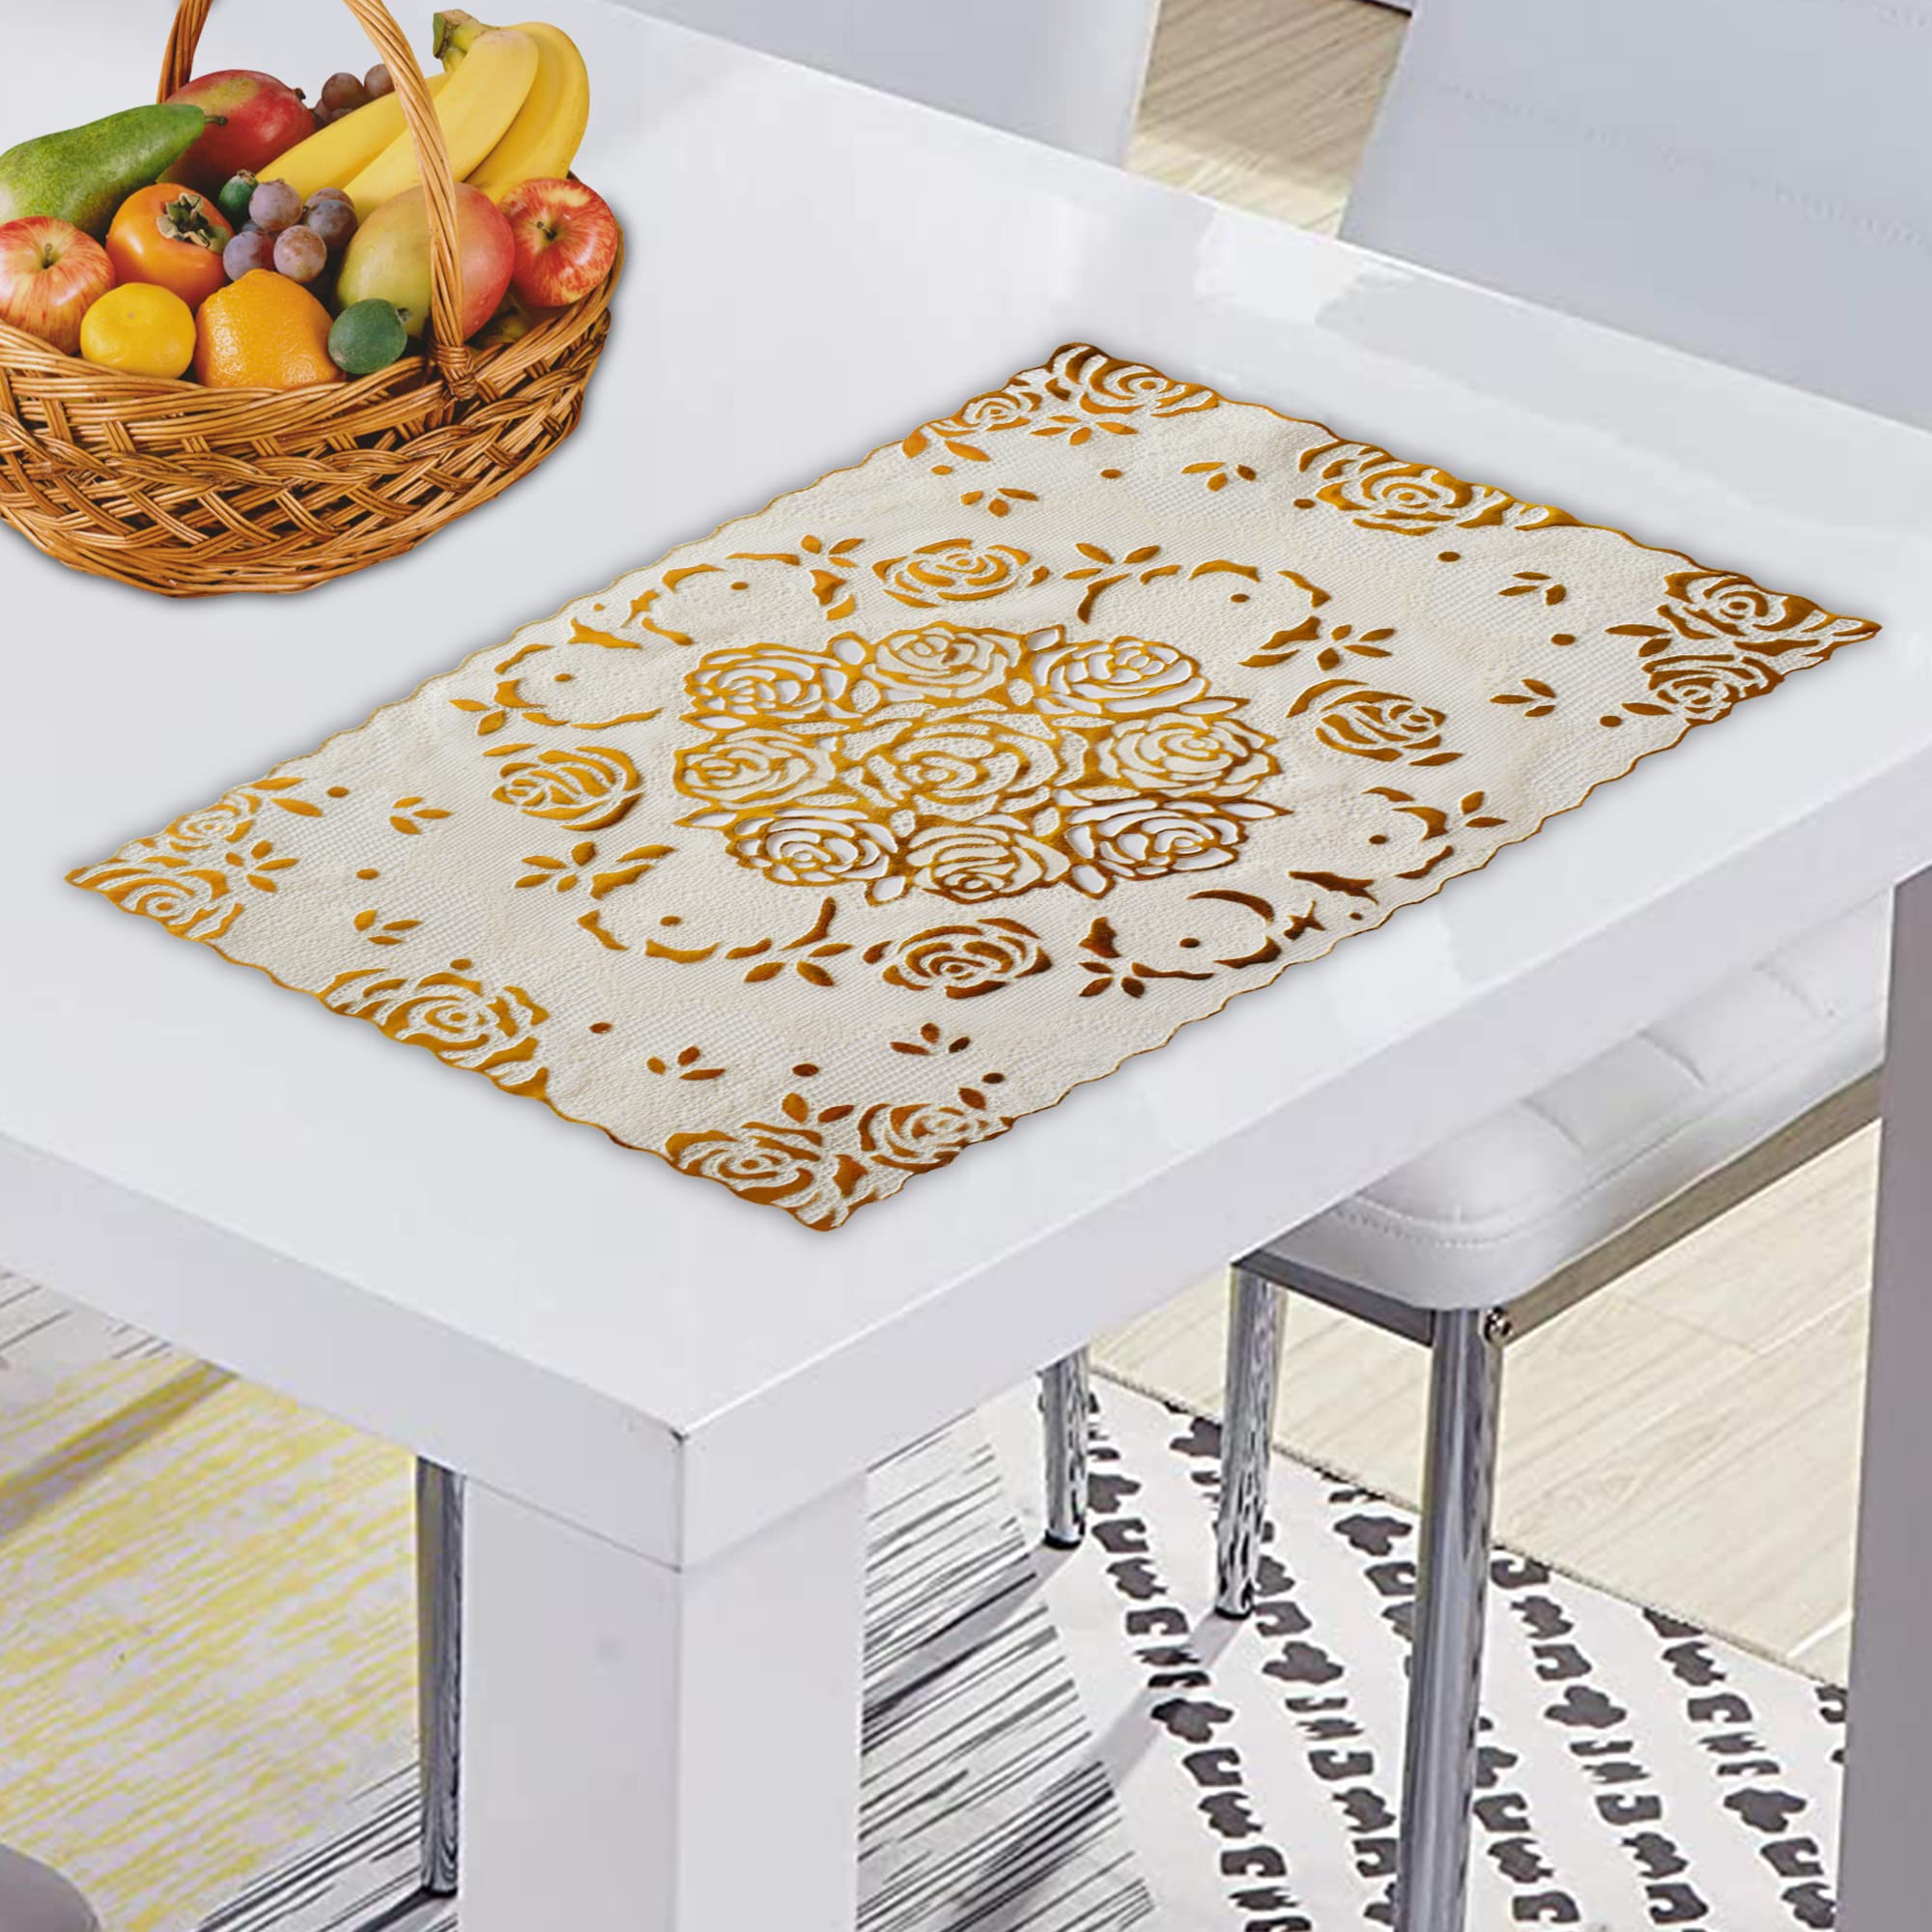 Kuber Industries Floral Design Virgin Microfibre Viny Soft Fabric 6 Pieces Dining Table Placemat Set (CTKTC045900, Cream, Polyester)